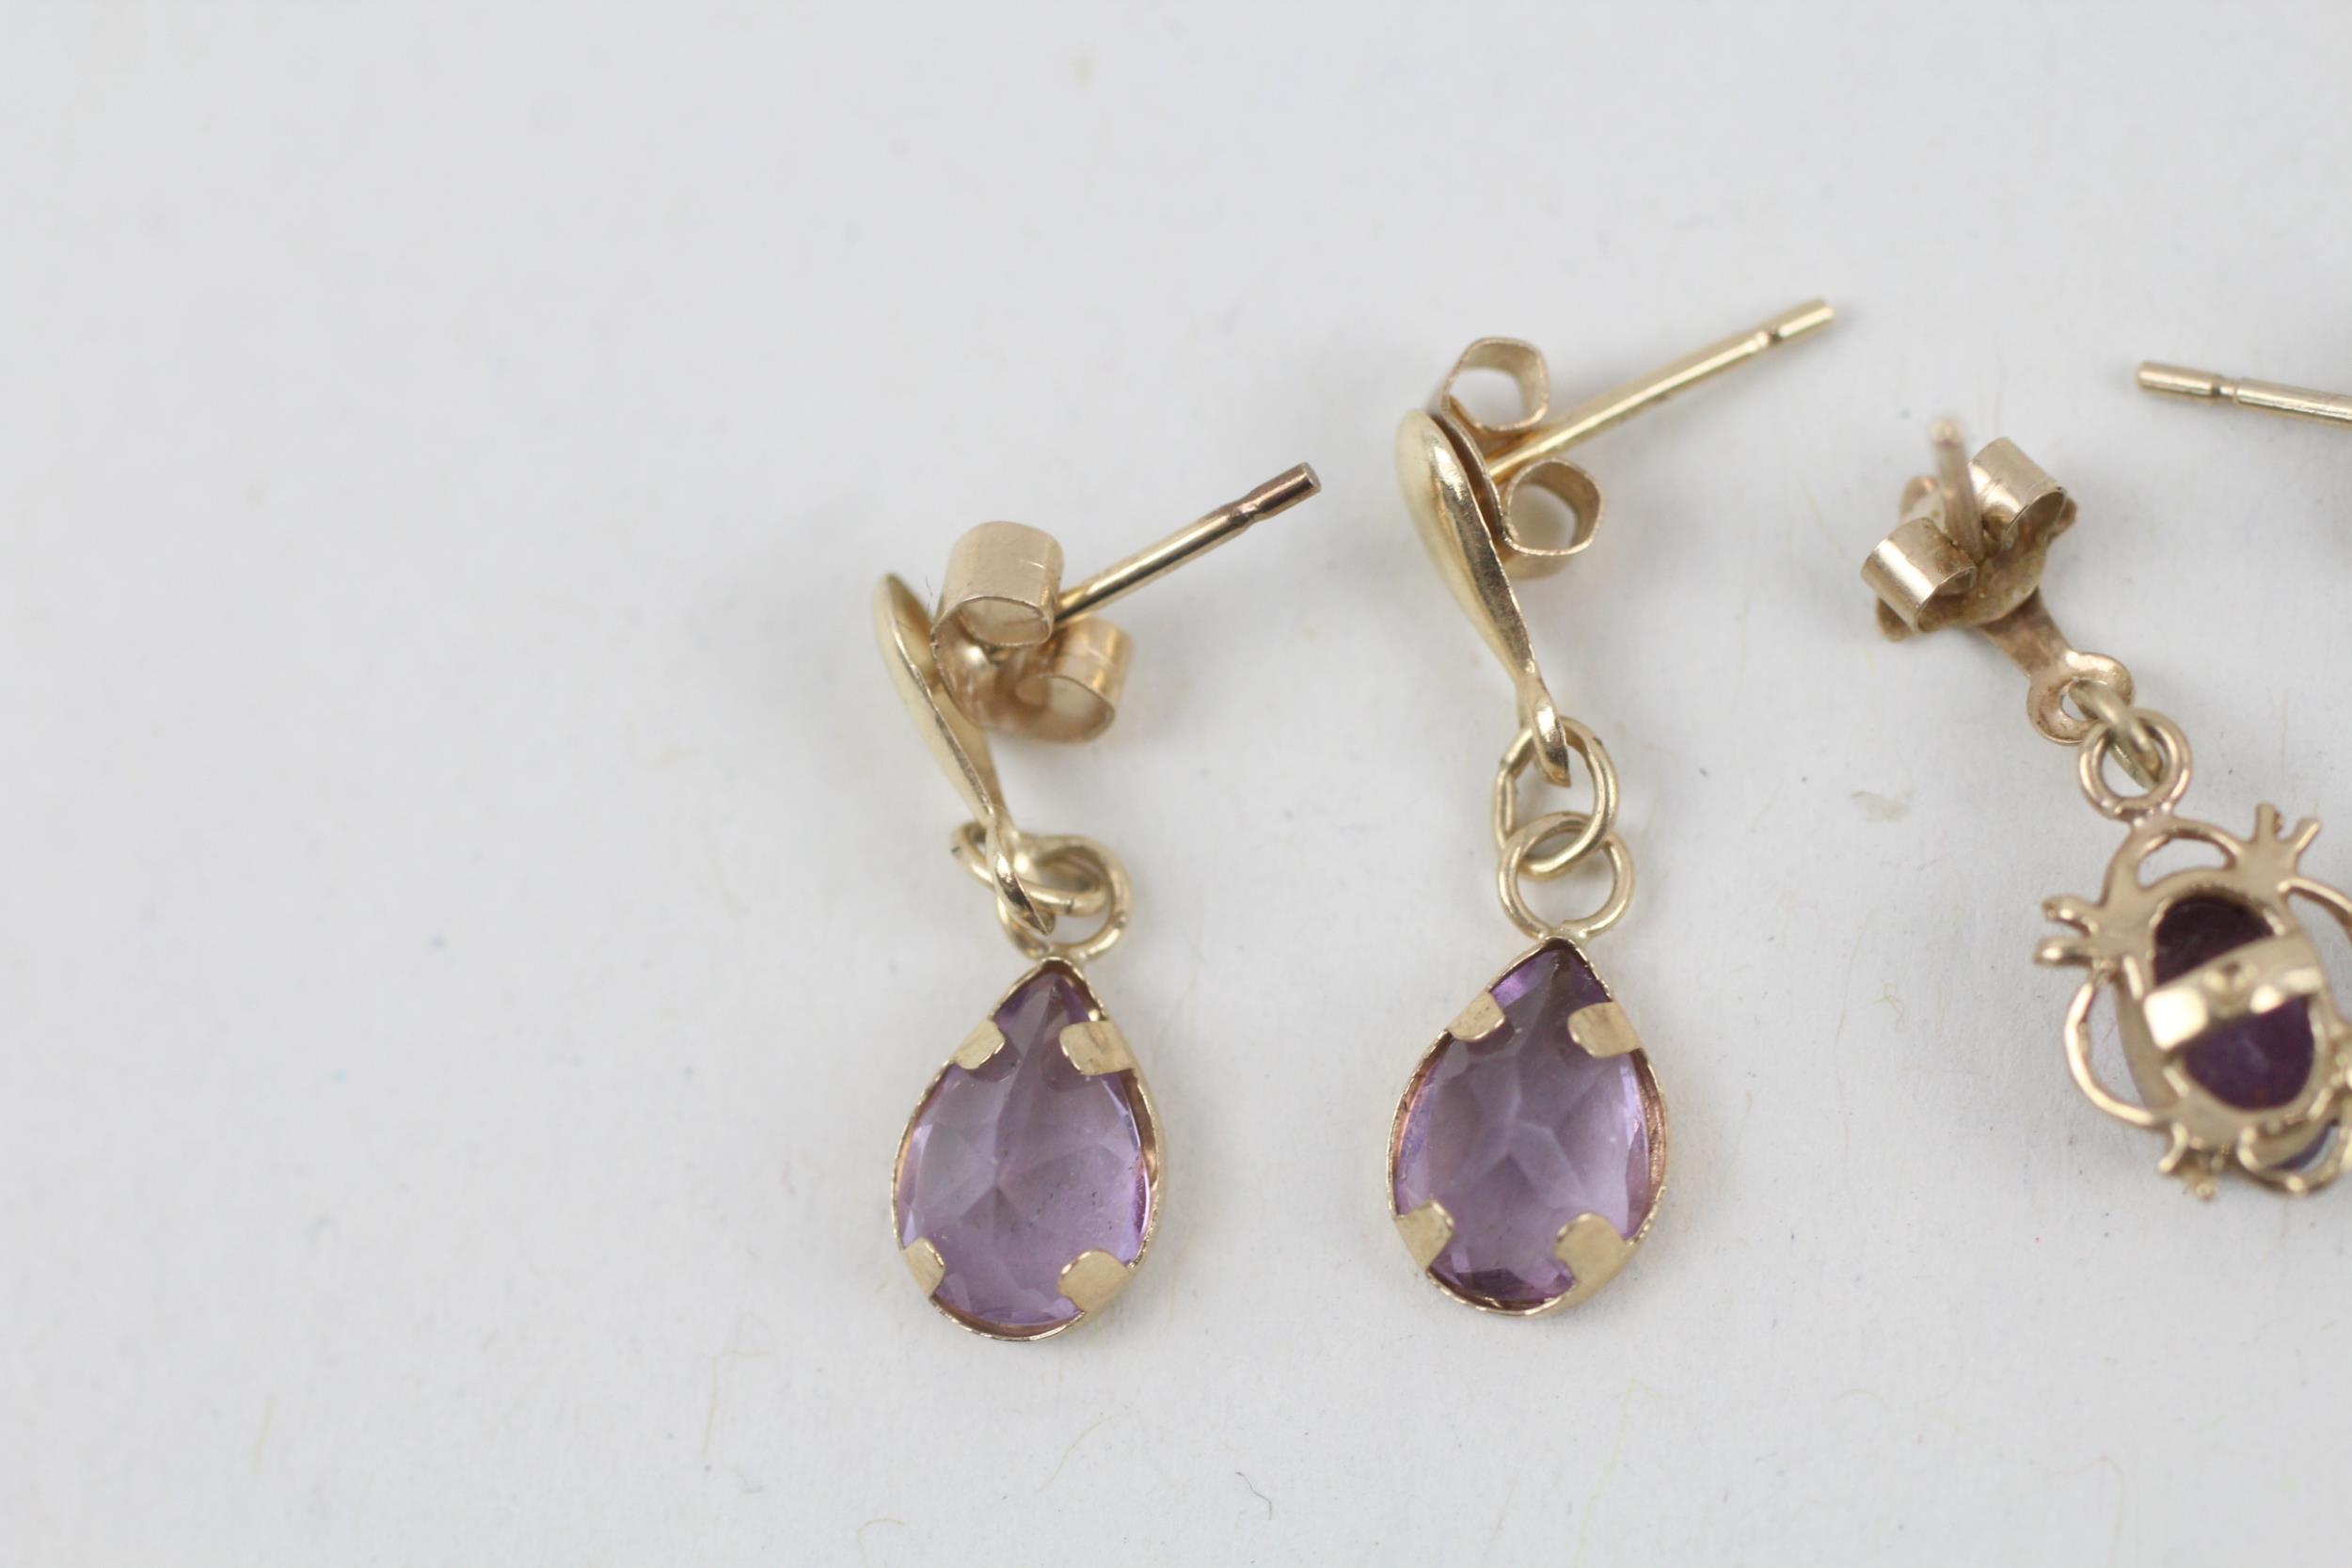 2x 9ct gold amethyst drop earrings with scroll backs - 1.5 g - Image 7 of 8